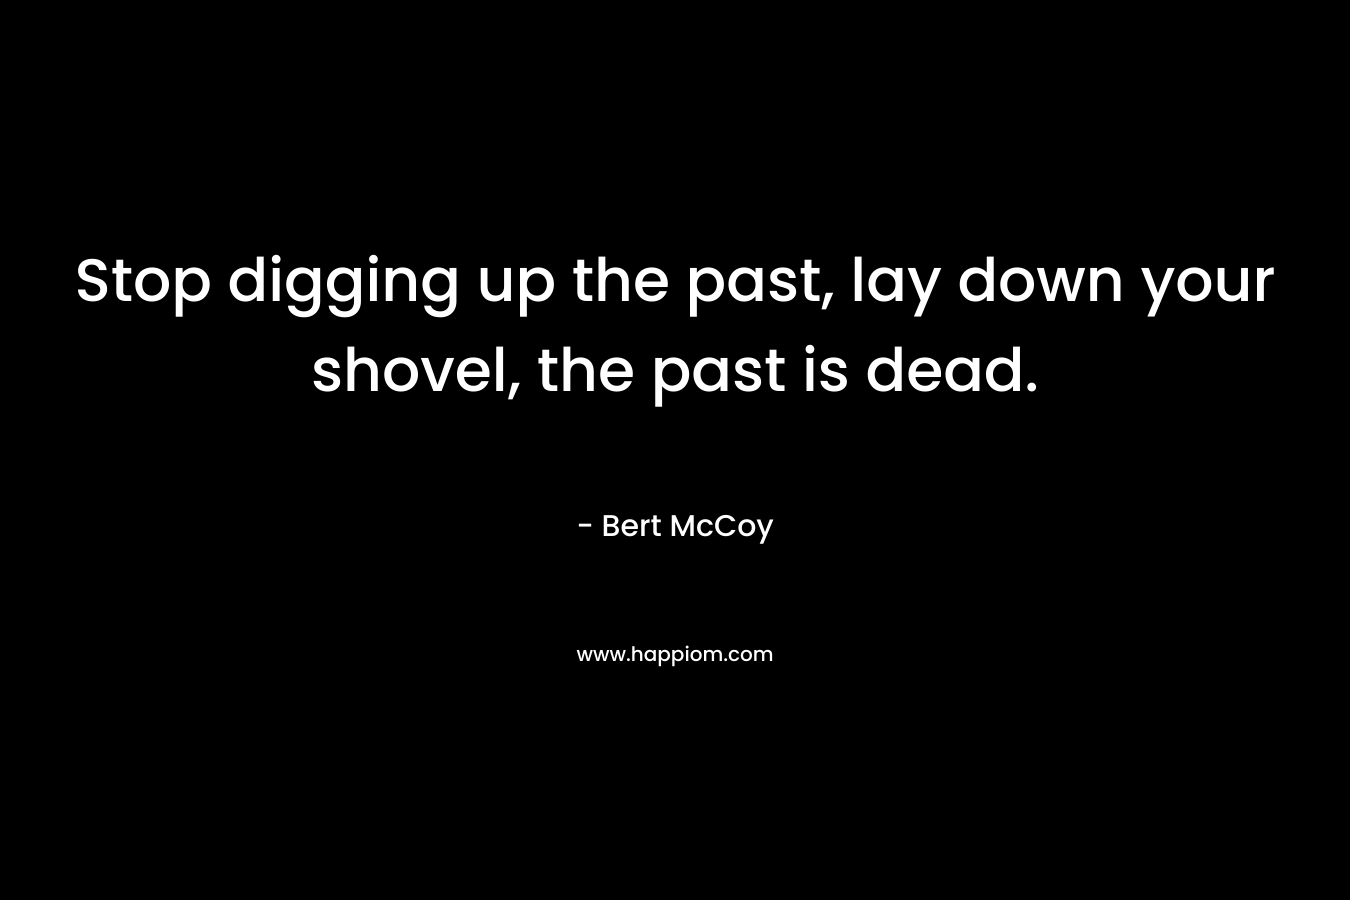 Stop digging up the past, lay down your shovel, the past is dead.